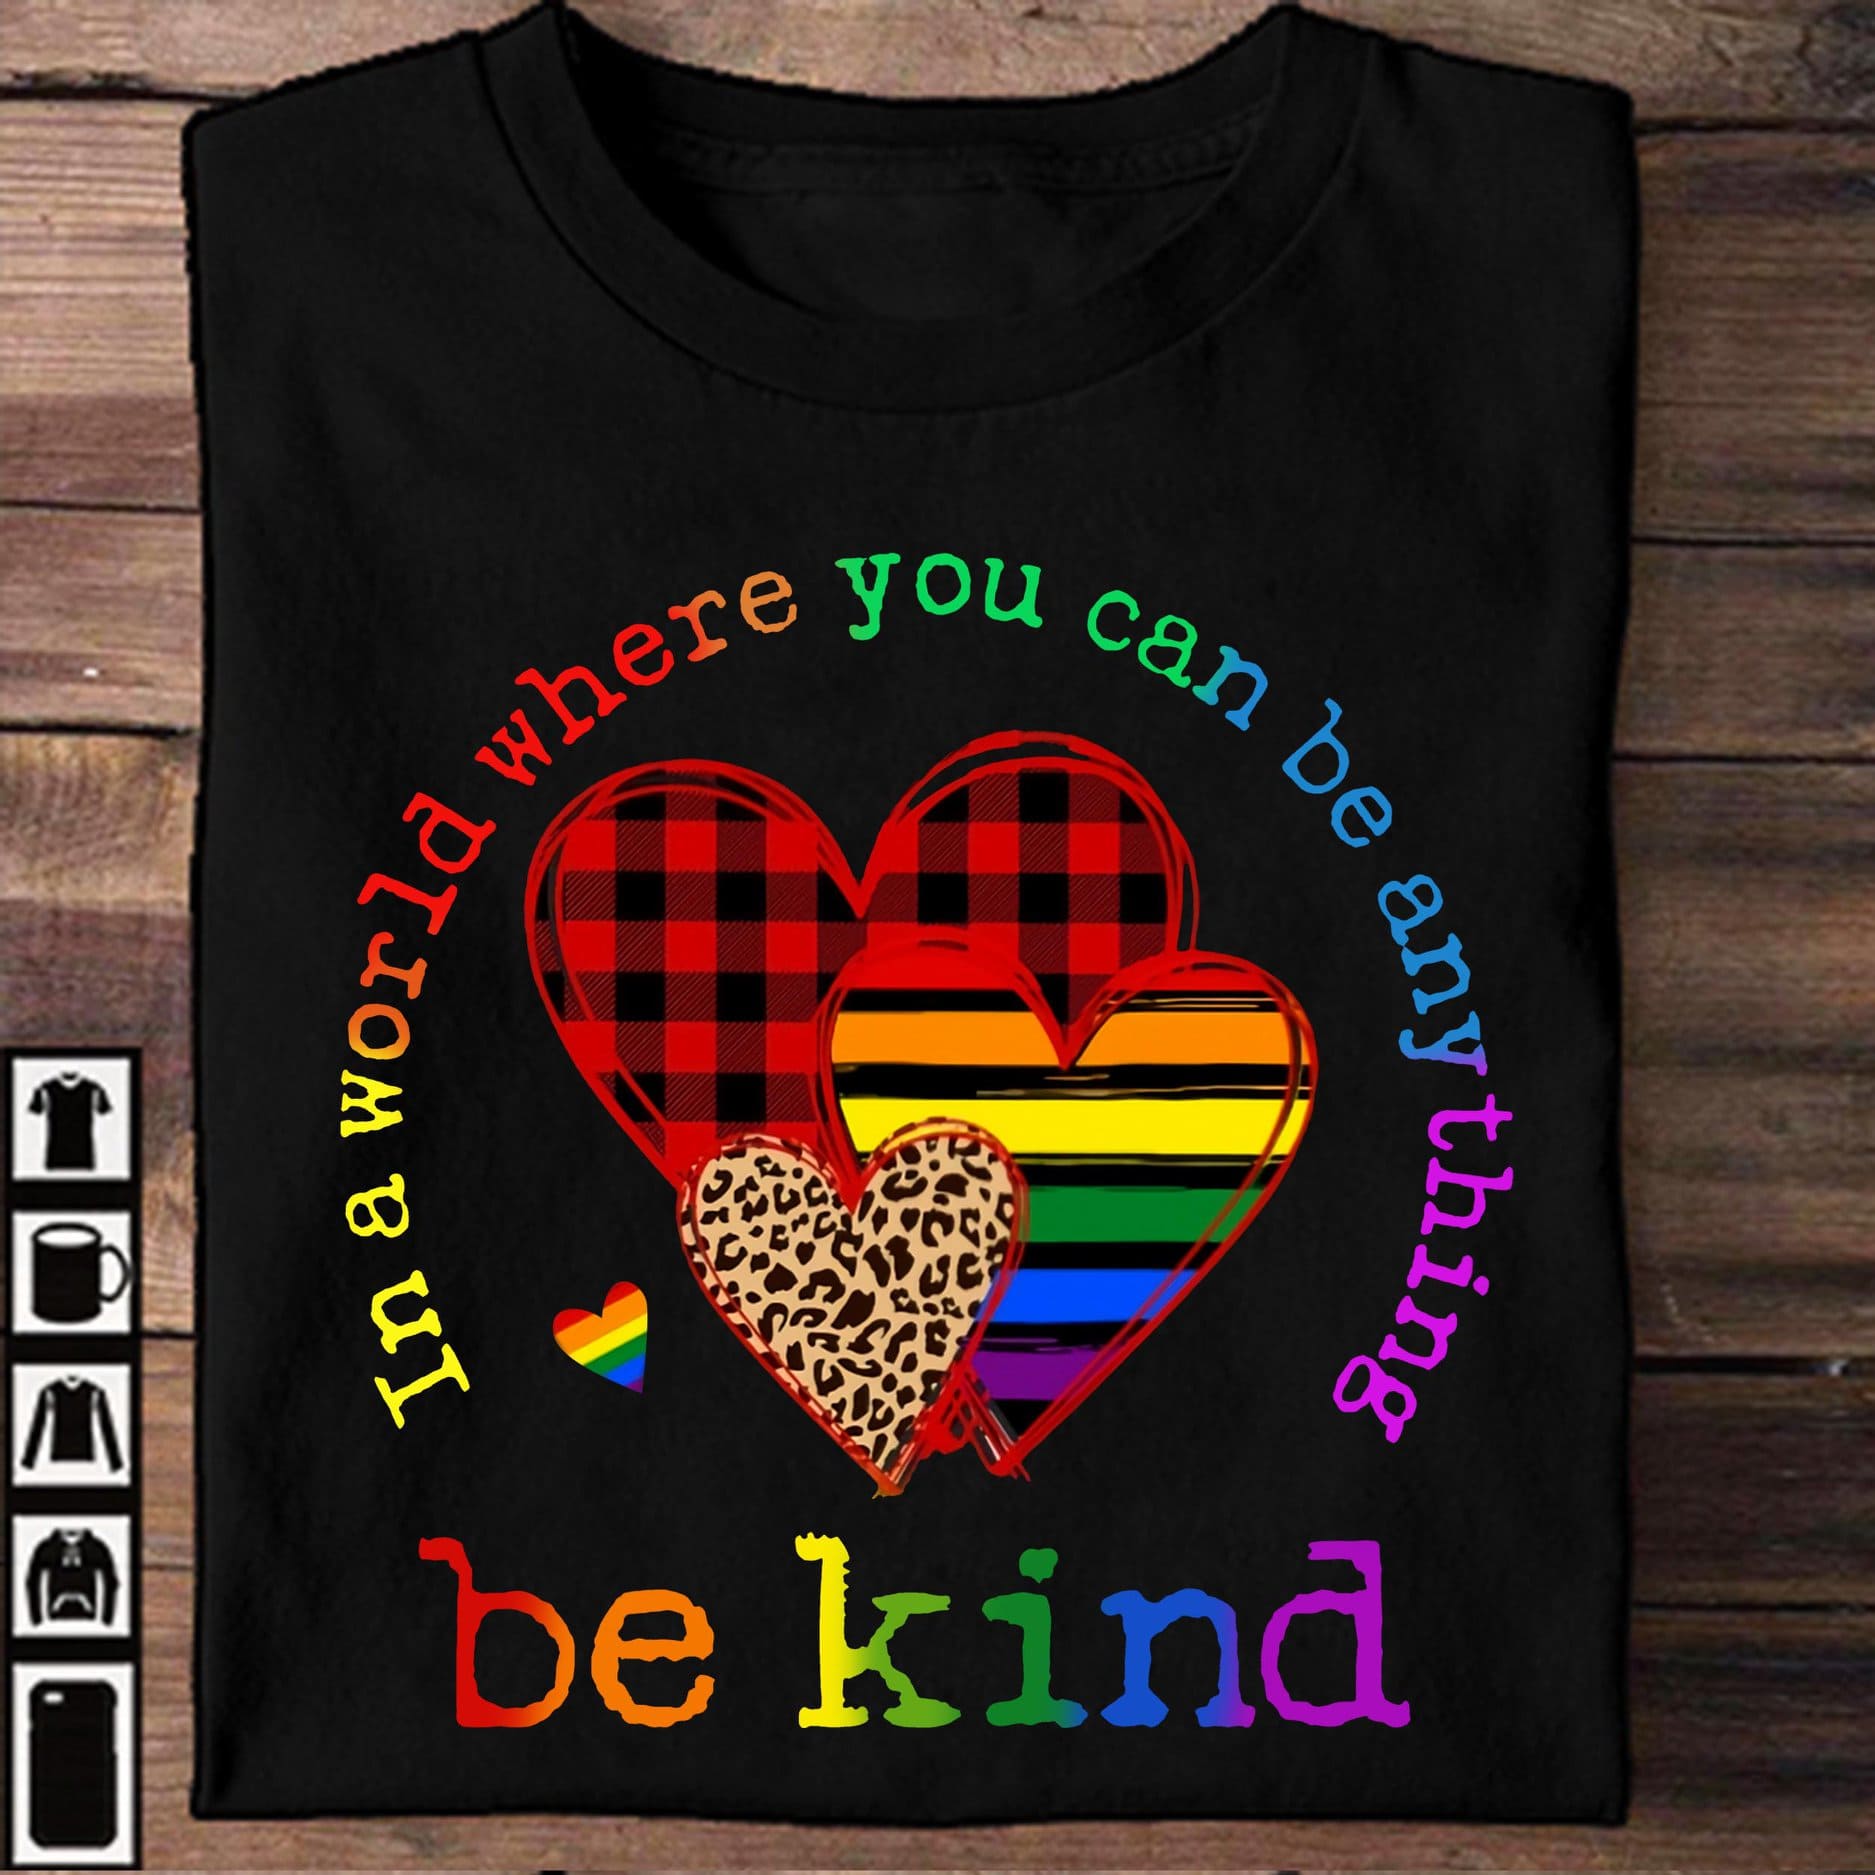 In a world where you can be anything, be kind - Lgbt community, Spread ...